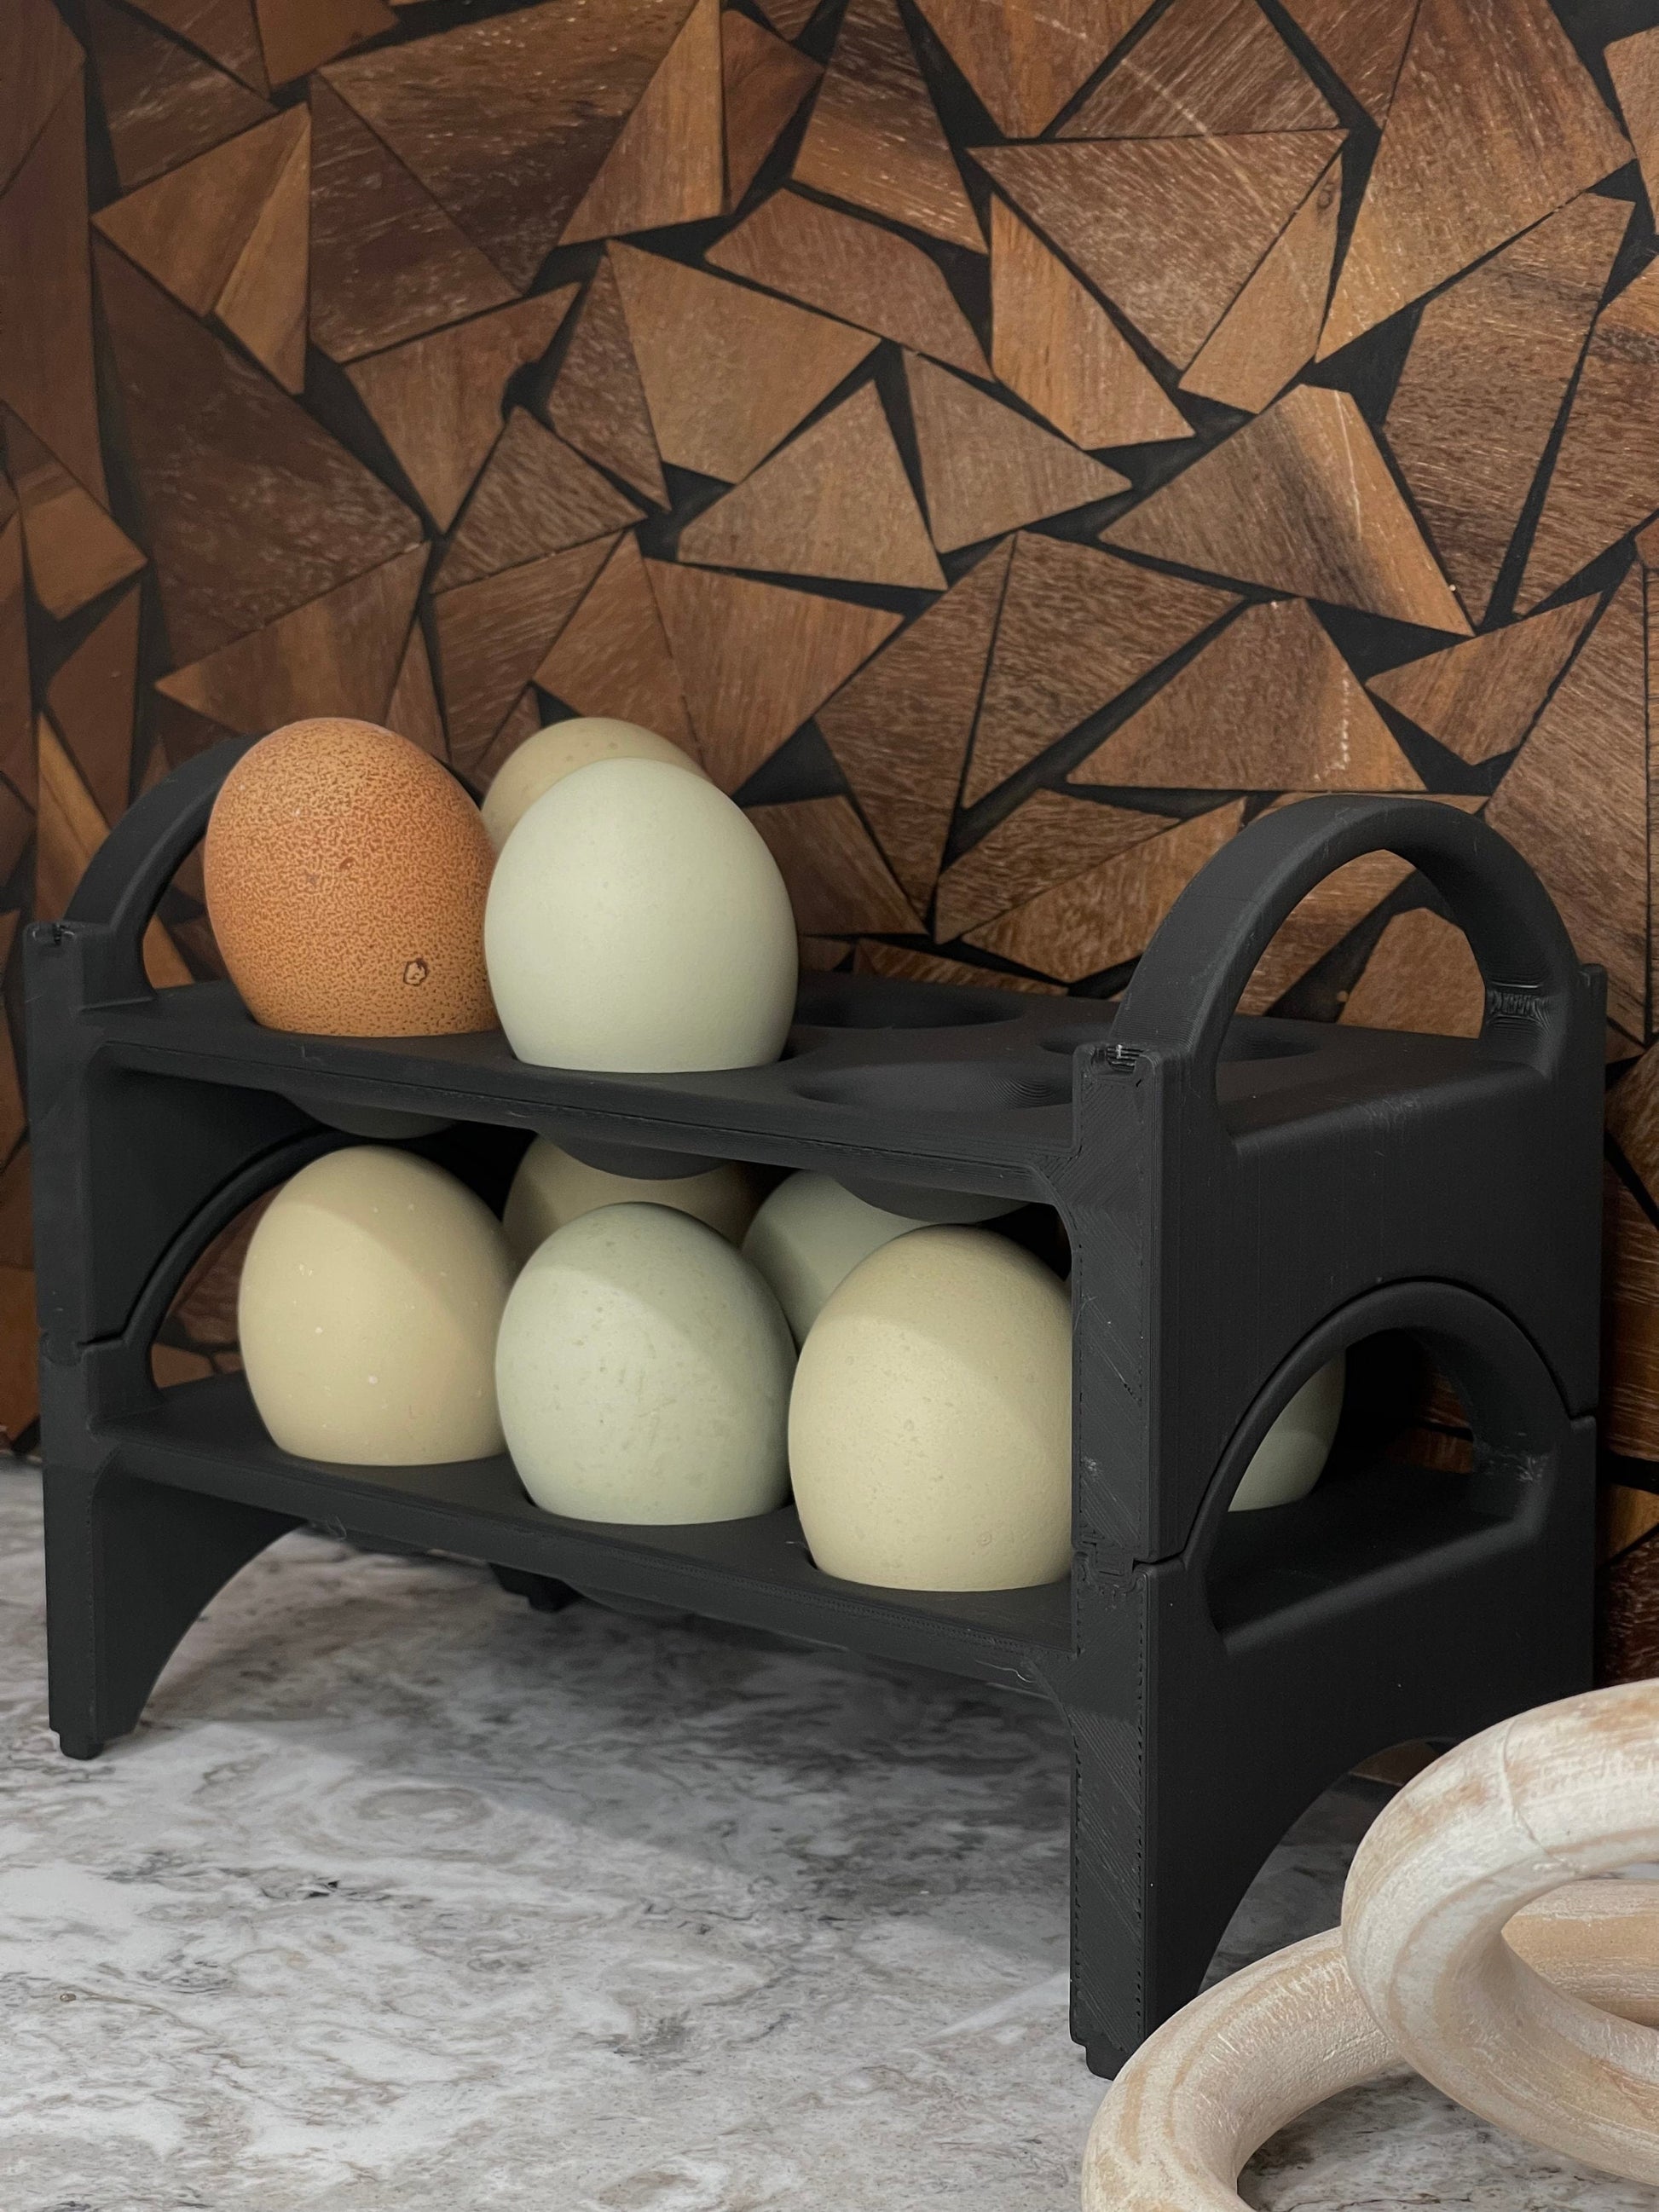 Stackable Egg Holder for your Countertop